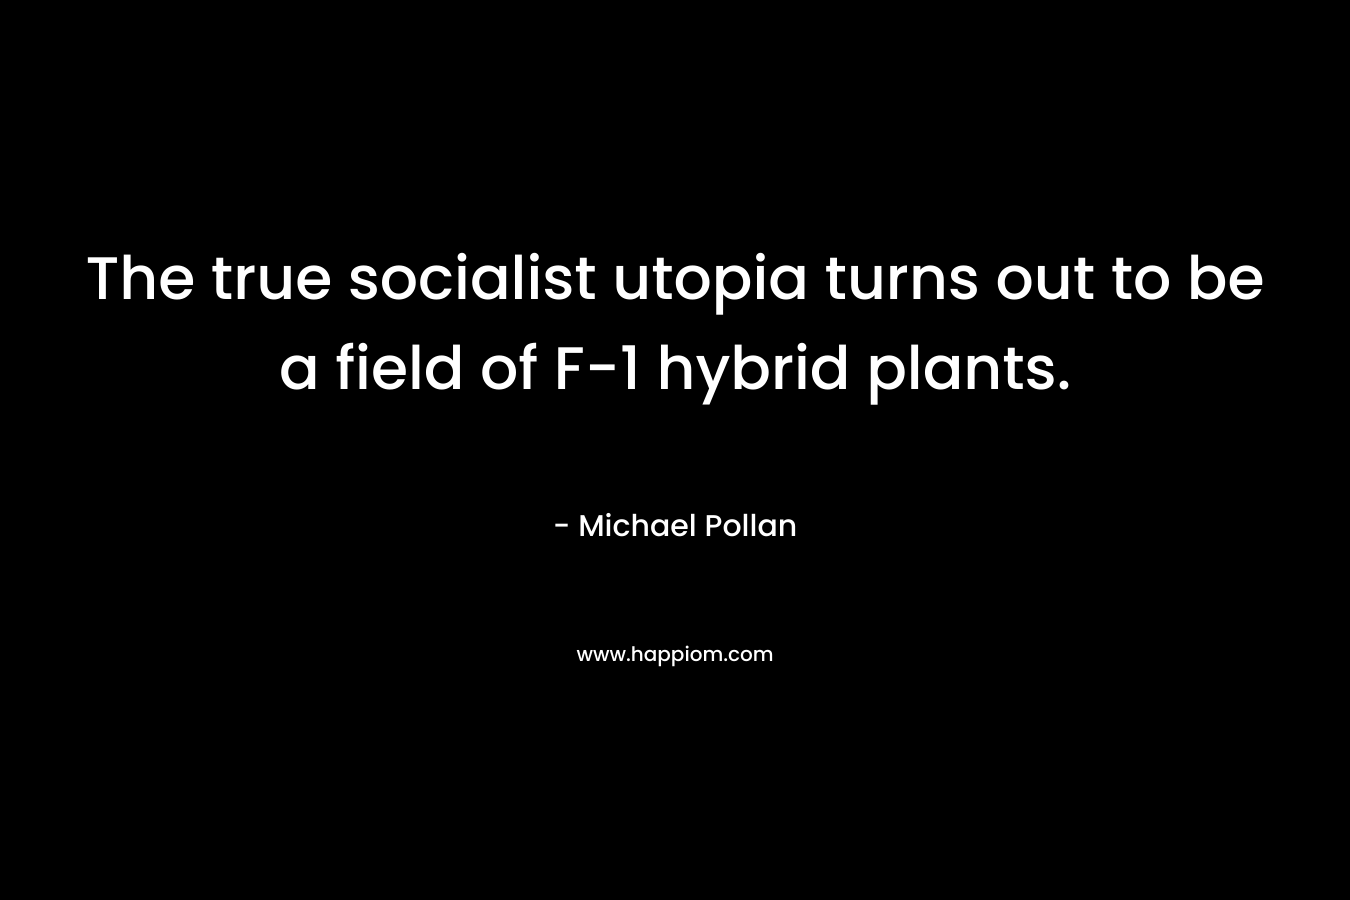 The true socialist utopia turns out to be a field of F-1 hybrid plants. – Michael Pollan